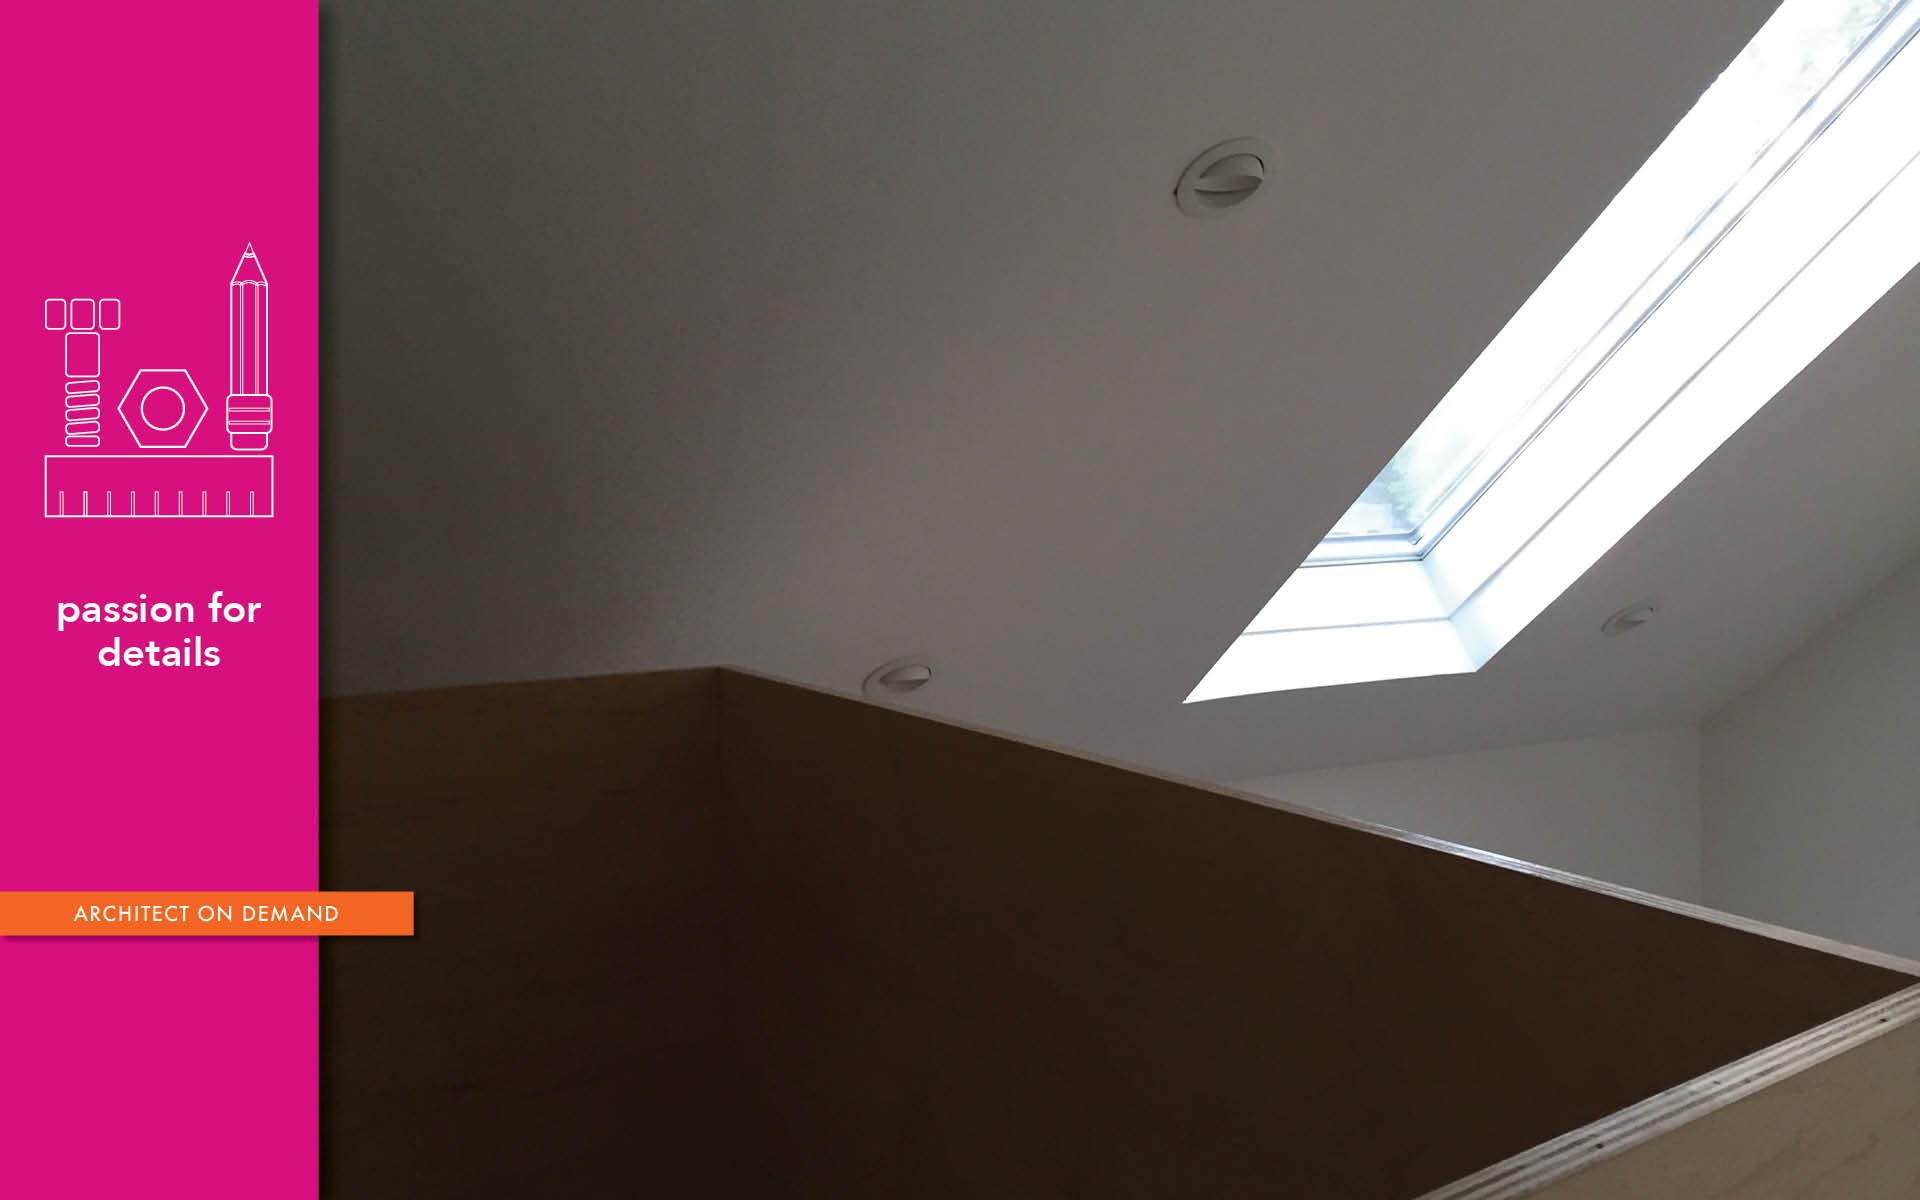 skylights, architect on demand, advice without strings